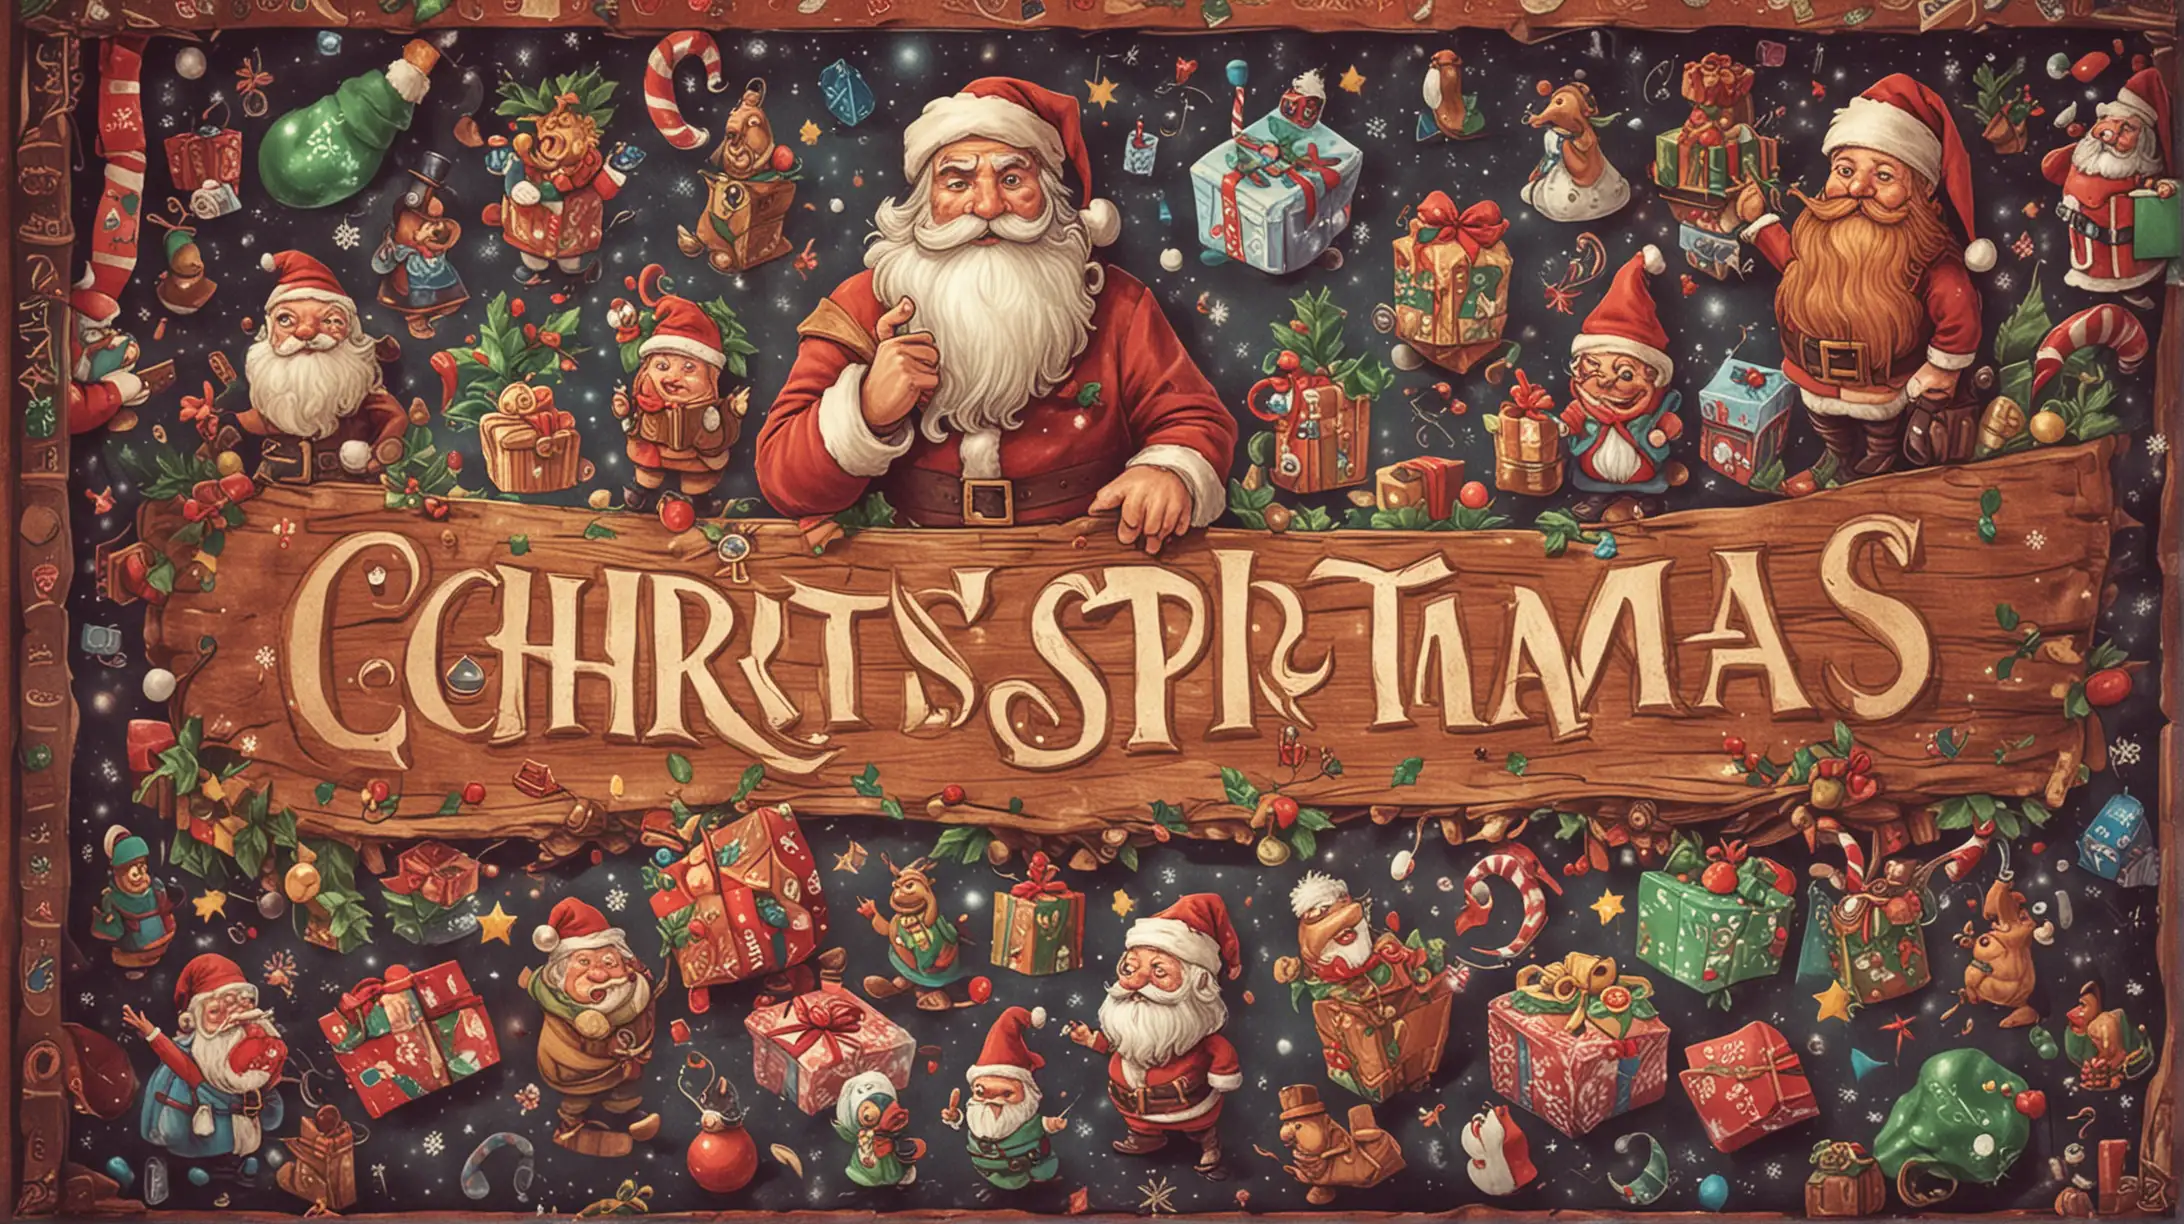 Christmas Board Game Cover with Festive Holiday Themes